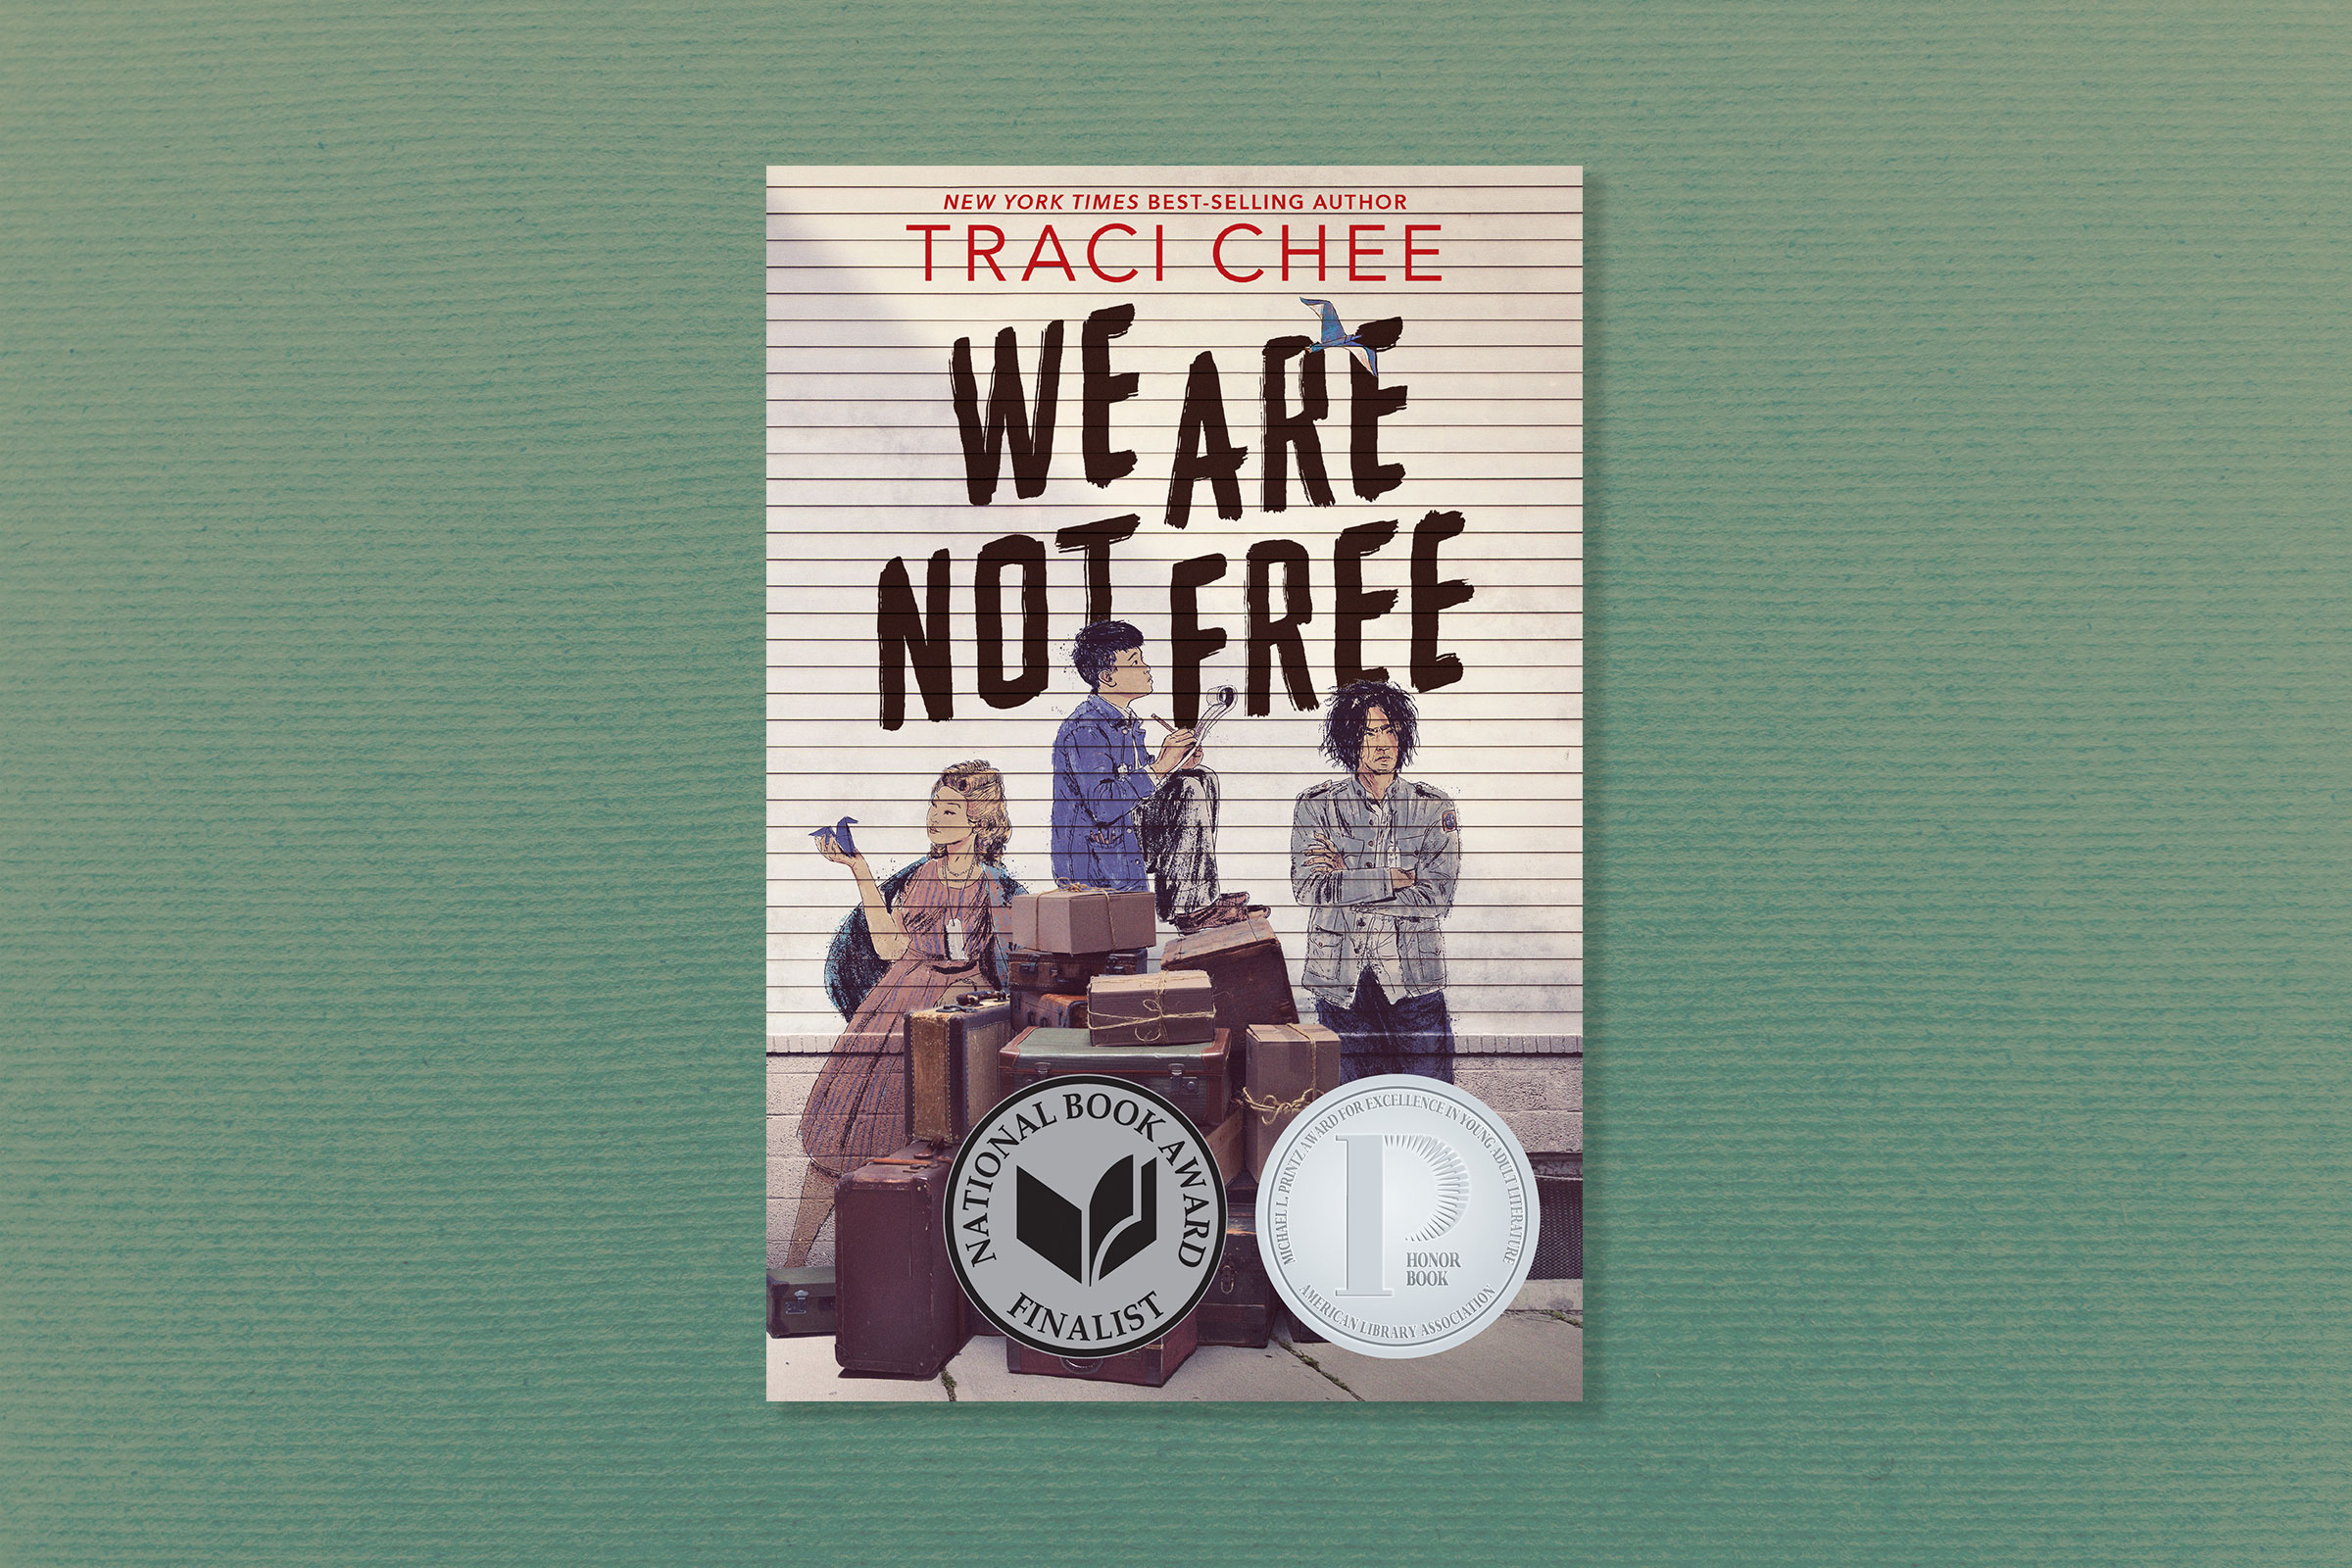 We are Not Free by Traci Chee